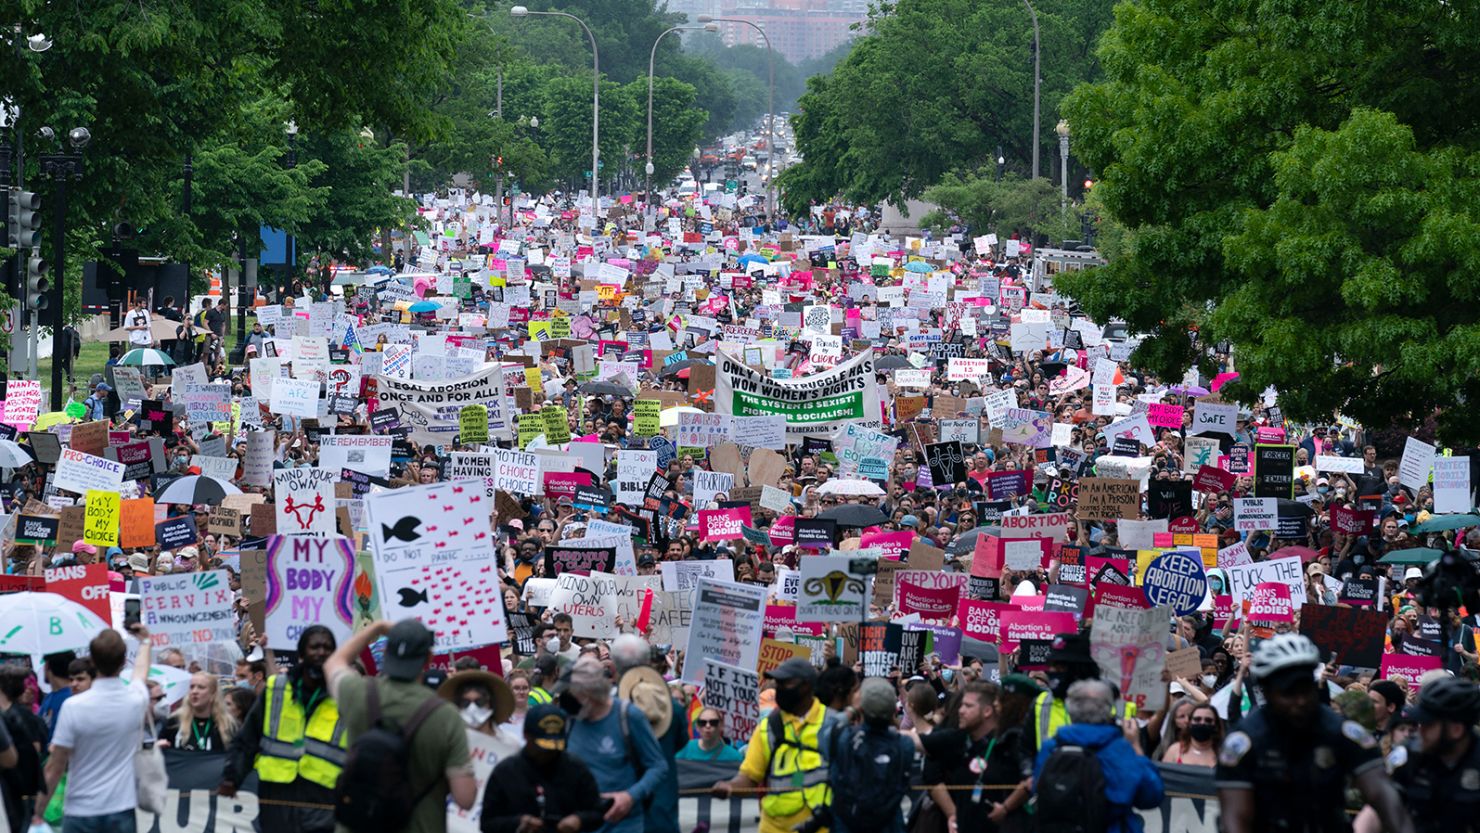 Activists take part in the The Bans Off Our Bodies march for abortion access, in Washington, DC on May 14, 2022.